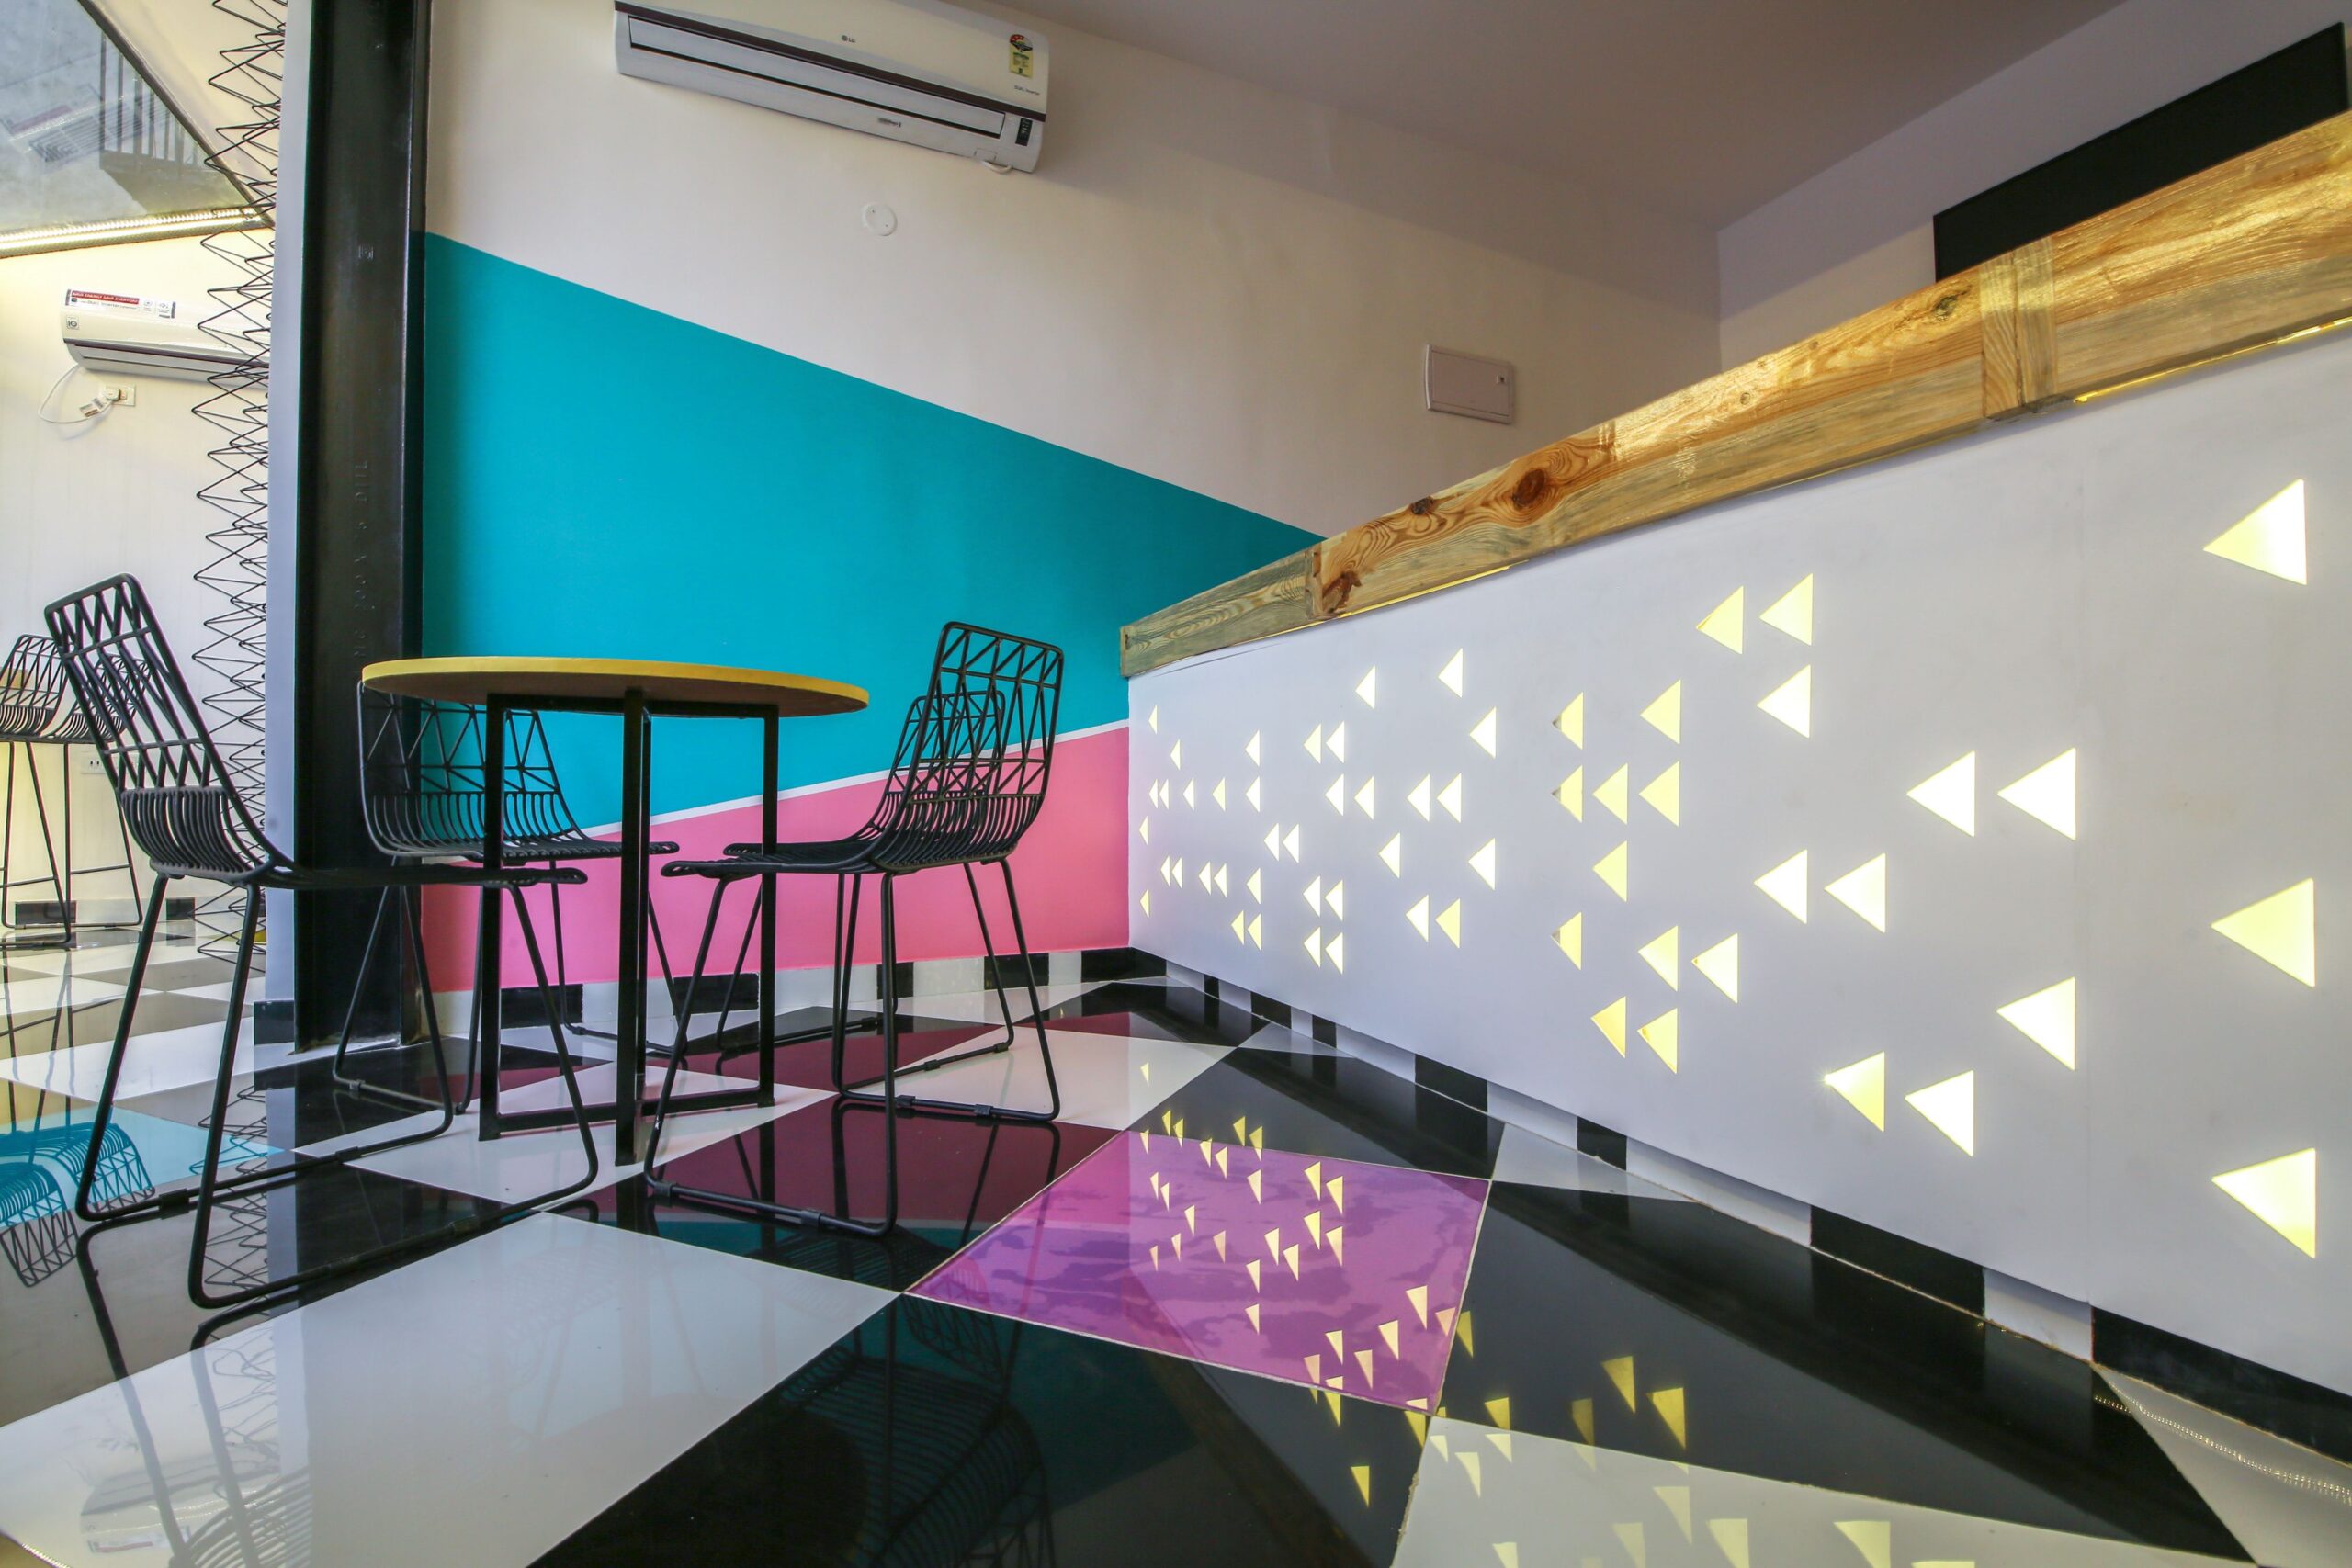 Rewind (Melting Moments), an ice cream parlour, in Hyderabad, by DesignAware 43